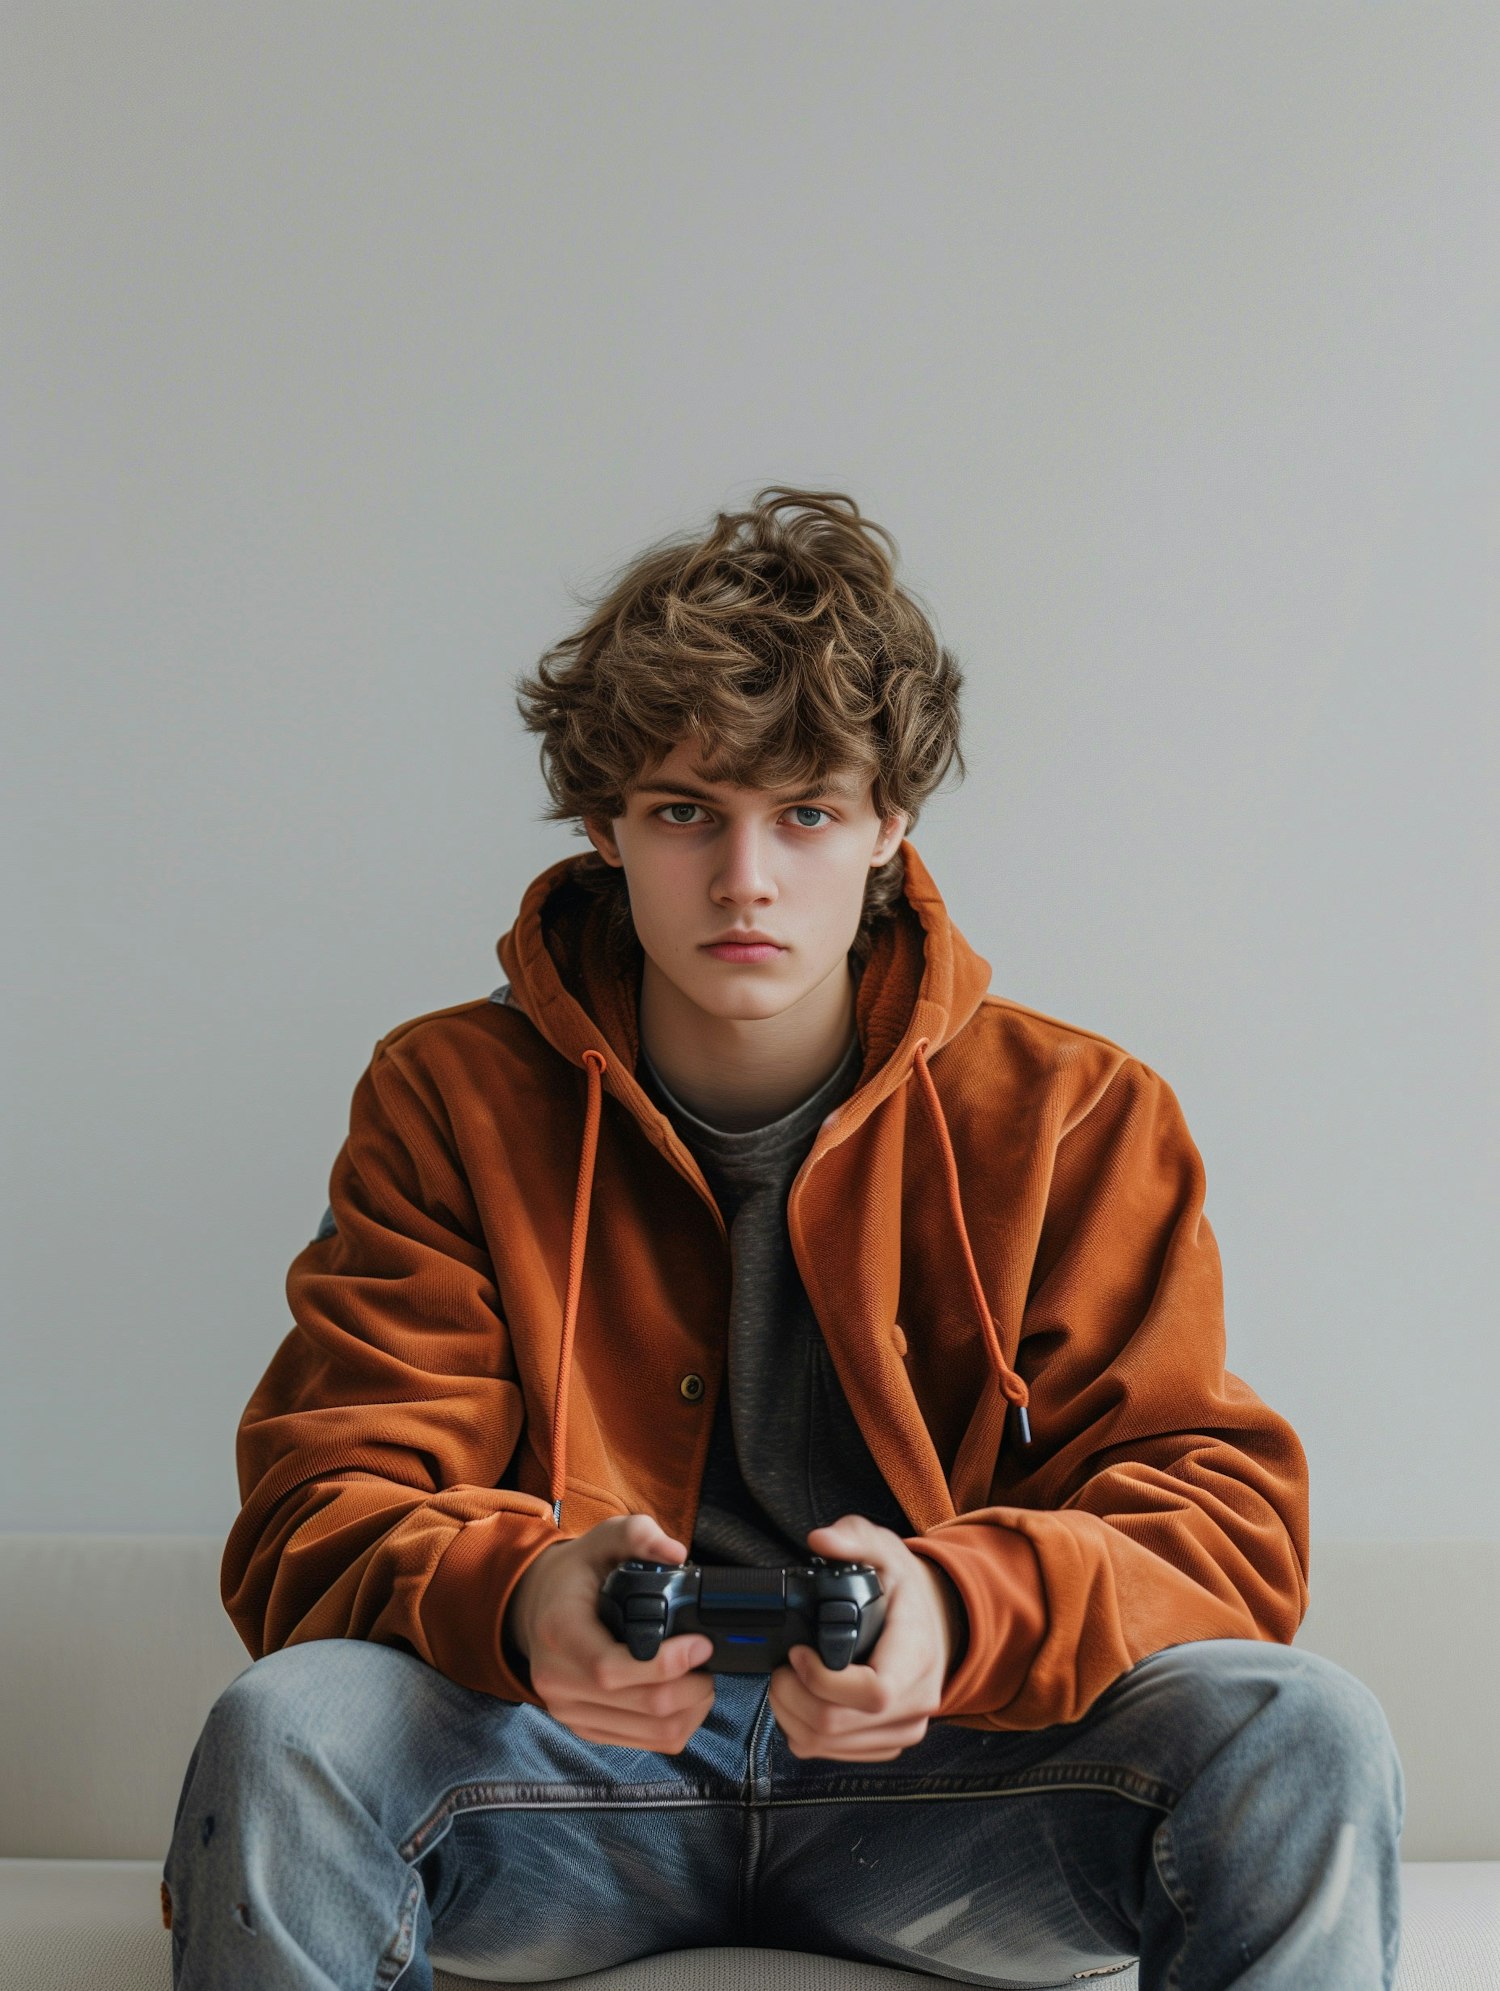 Young Male Gamer Seated on Sofa